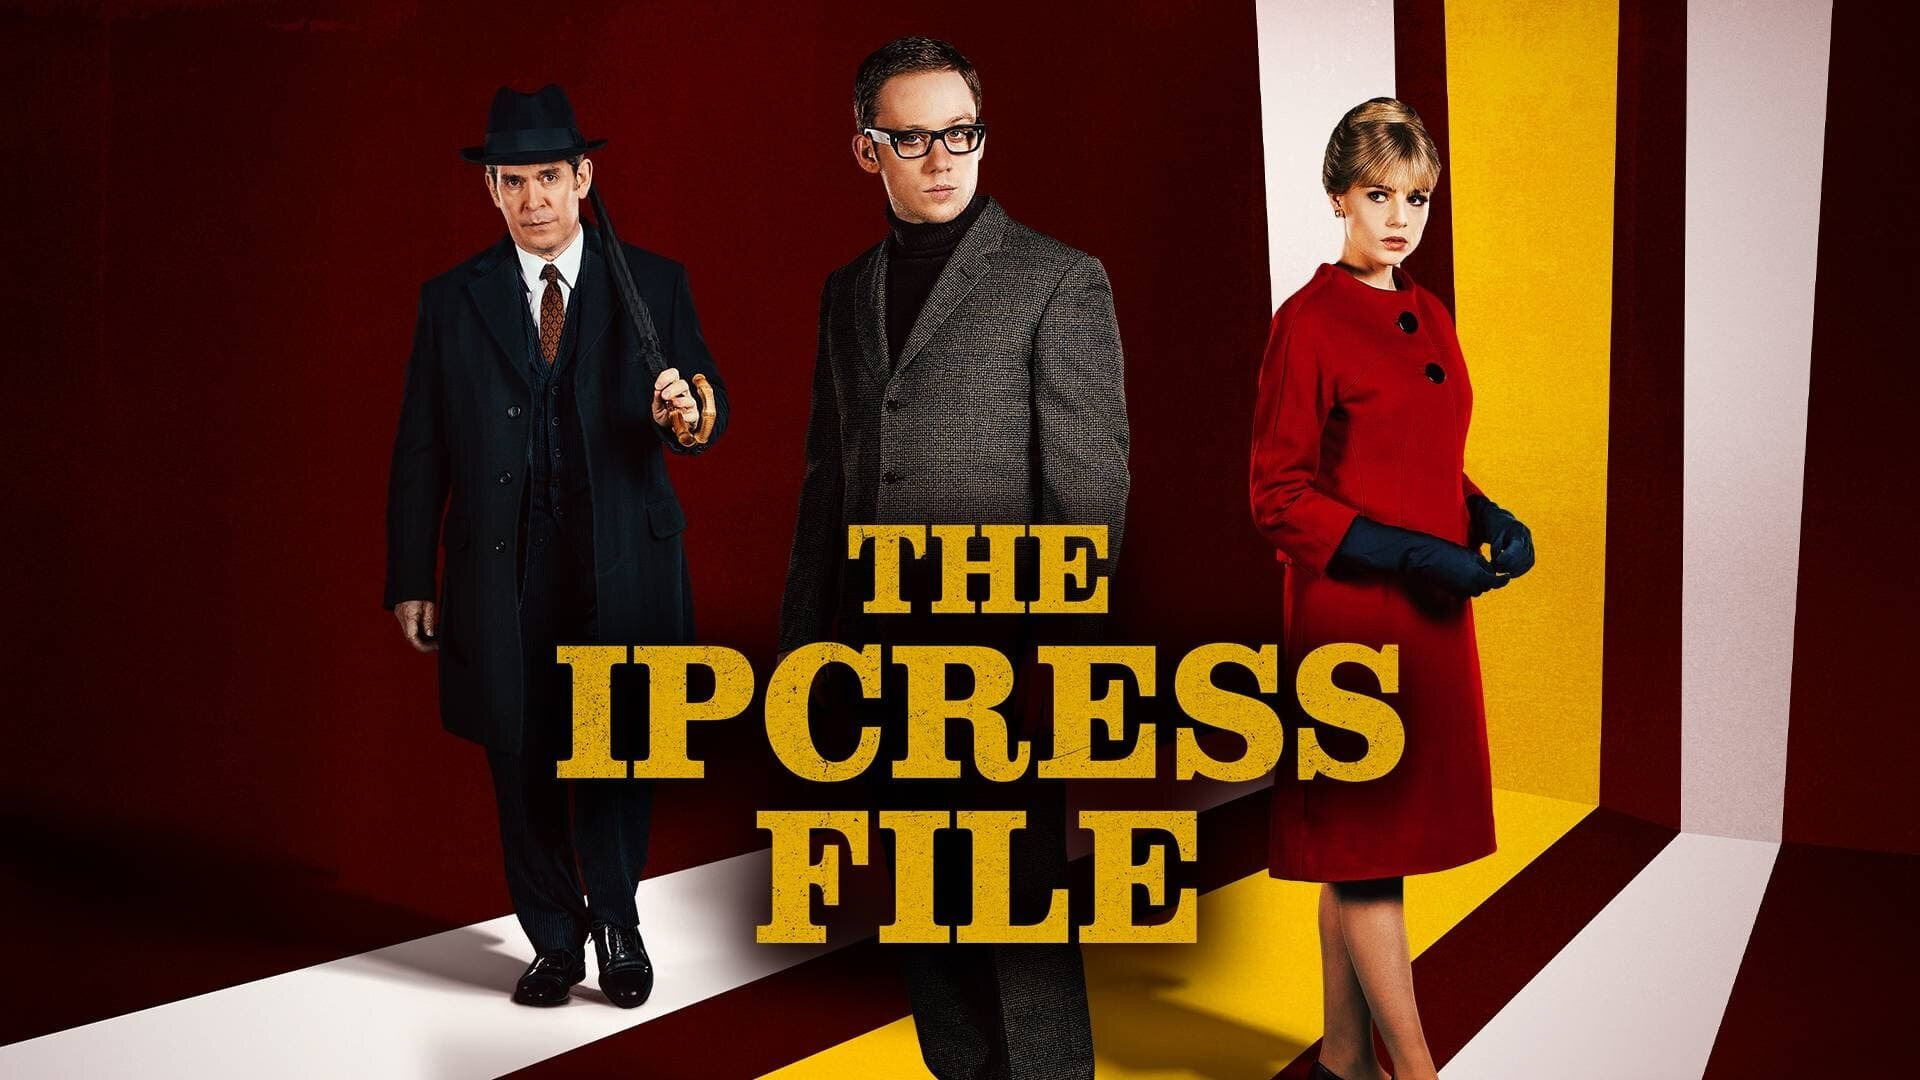 Show The Ipcress File